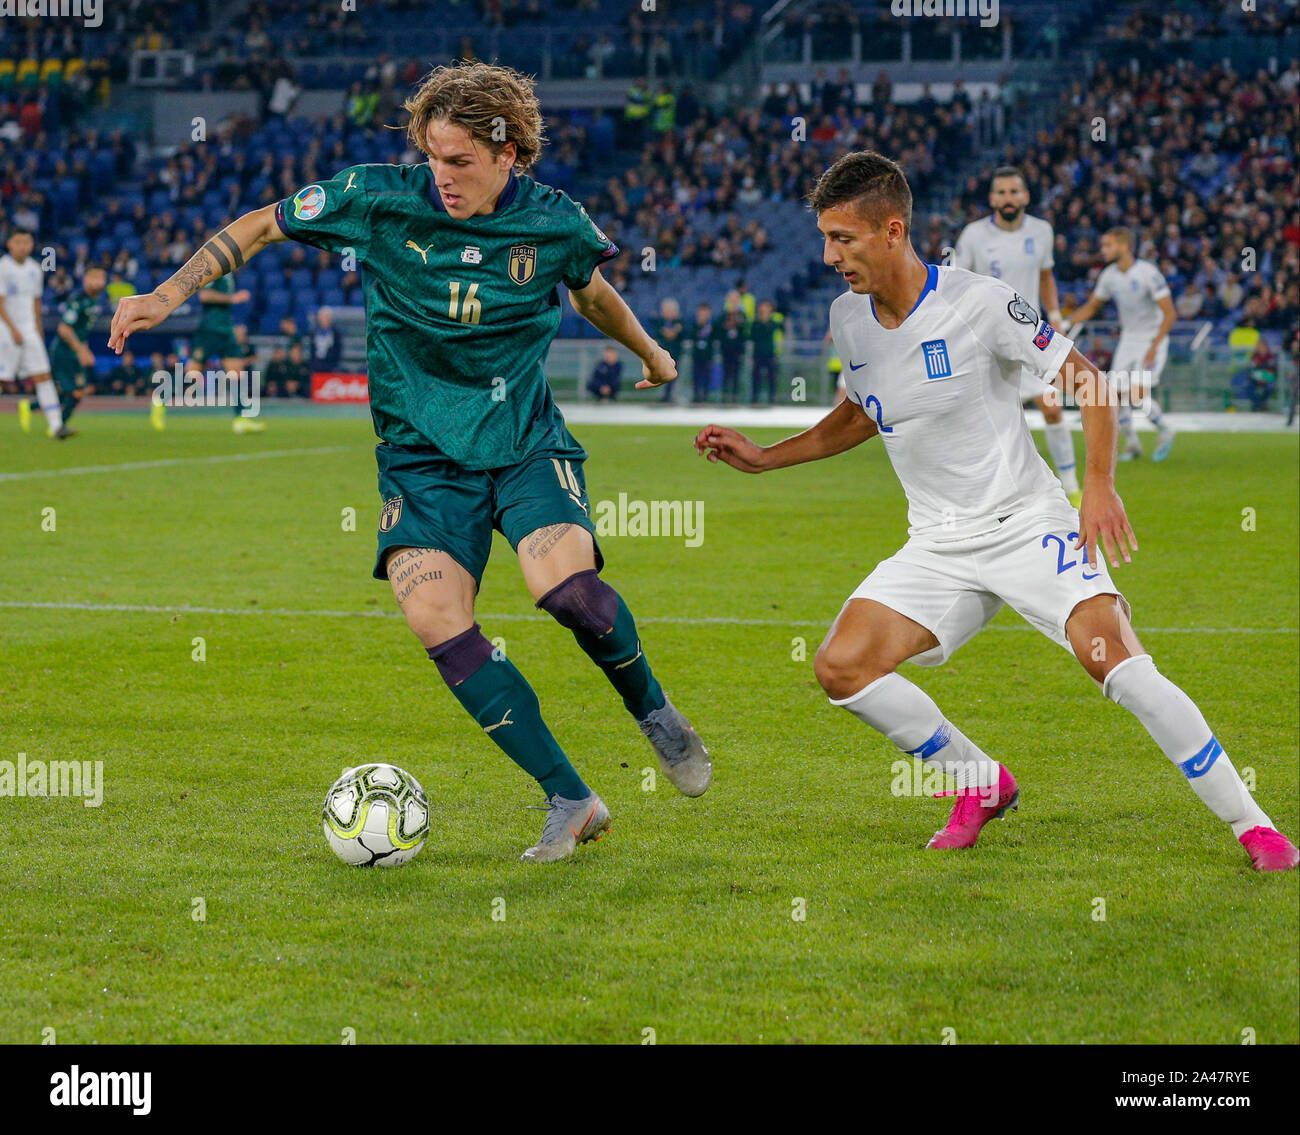 Rome, Italy. . 12th Oct, 2019. 22/10/2019 Rome, Football match between ITALY vs GREECE valid for the European football championships.In picture .NicolËœ Zaniolo Credit: Fabio Sasso/ZUMA Wire/Alamy Live News Stock Photo